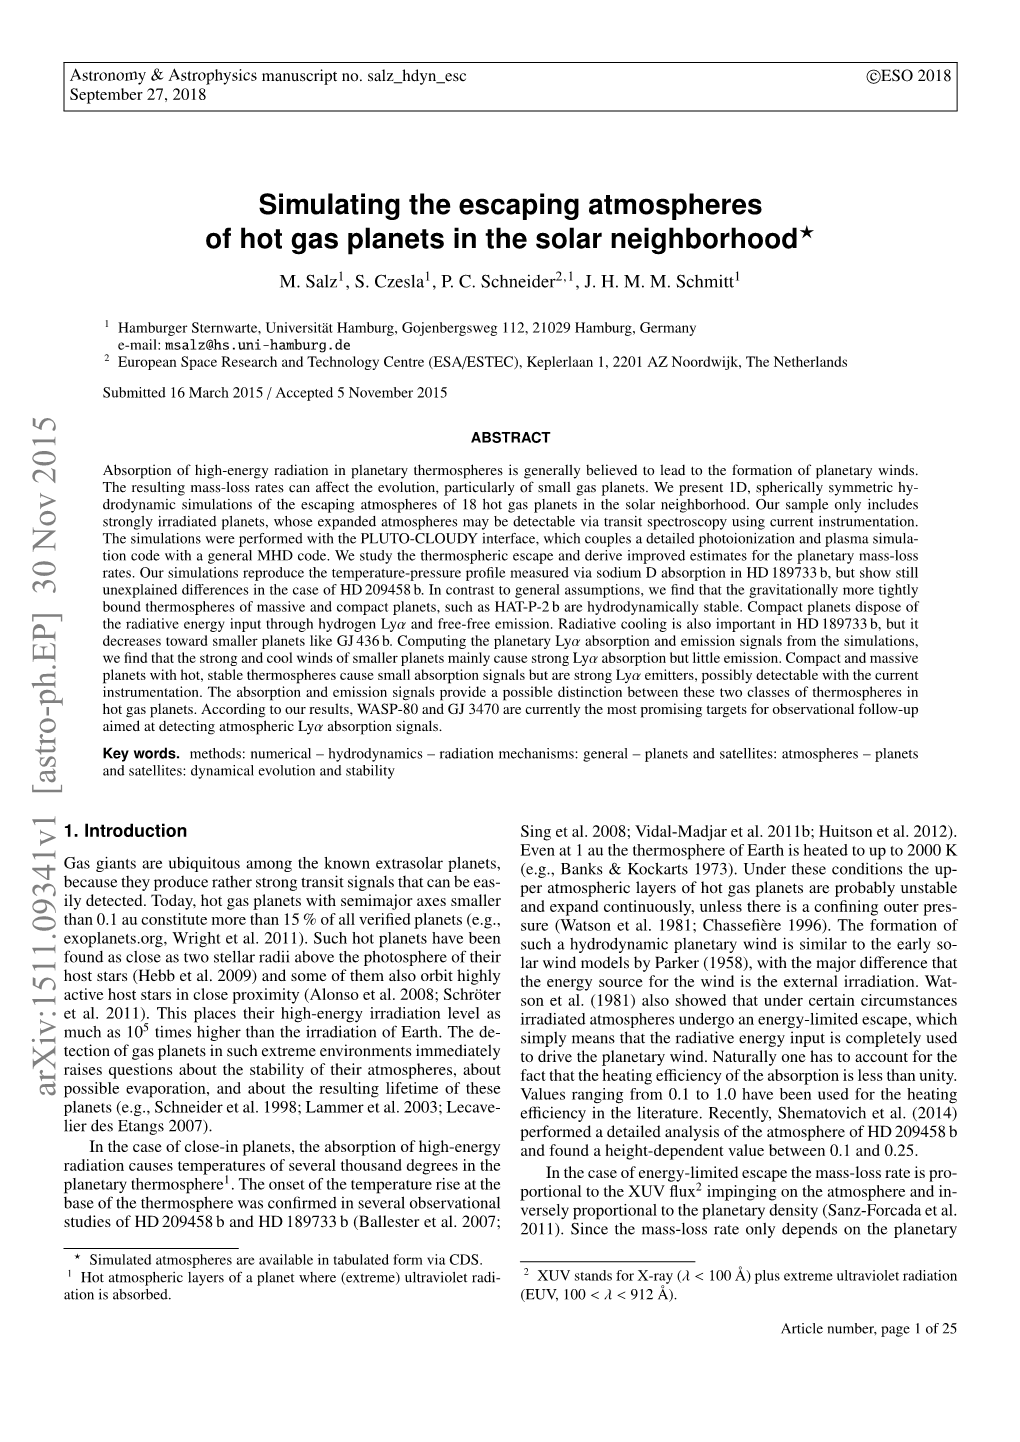 Simulating the Escaping Atmospheres of Hot Gas Planets in the Solar Neighborhood? M